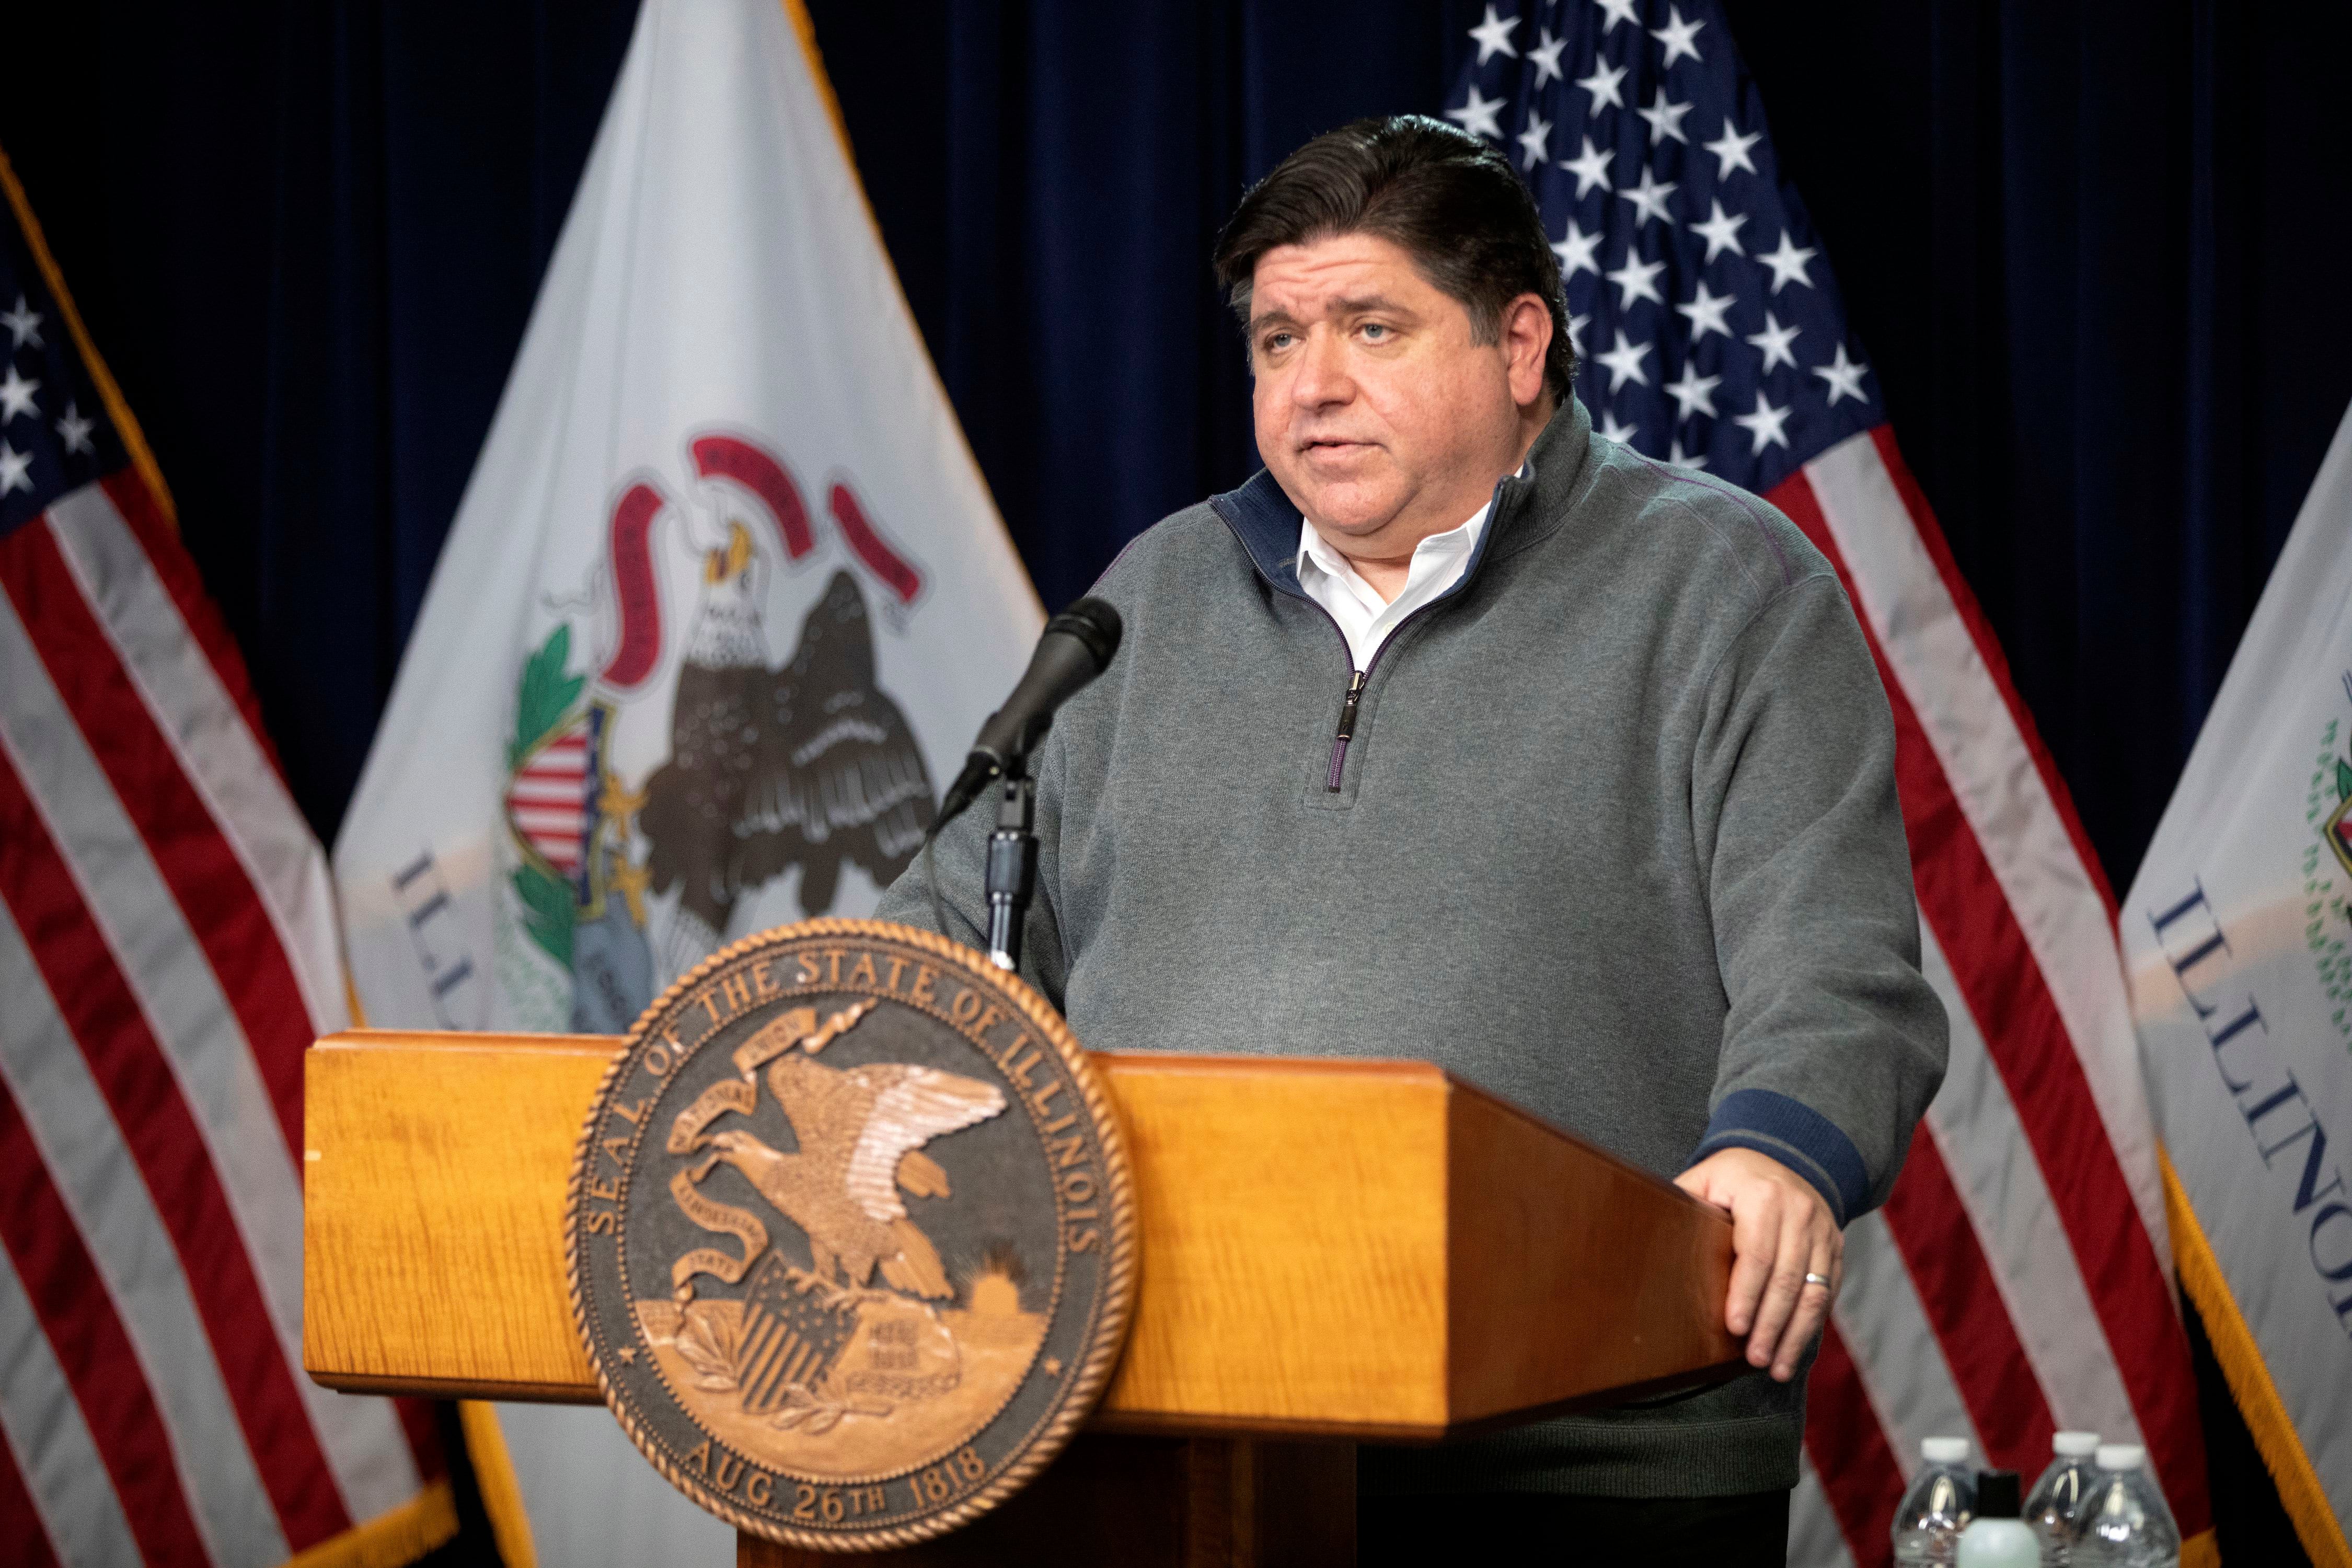 Illinois Governor J.B. Pritzker stands at a podium, wearing a grey pull-over sweater.